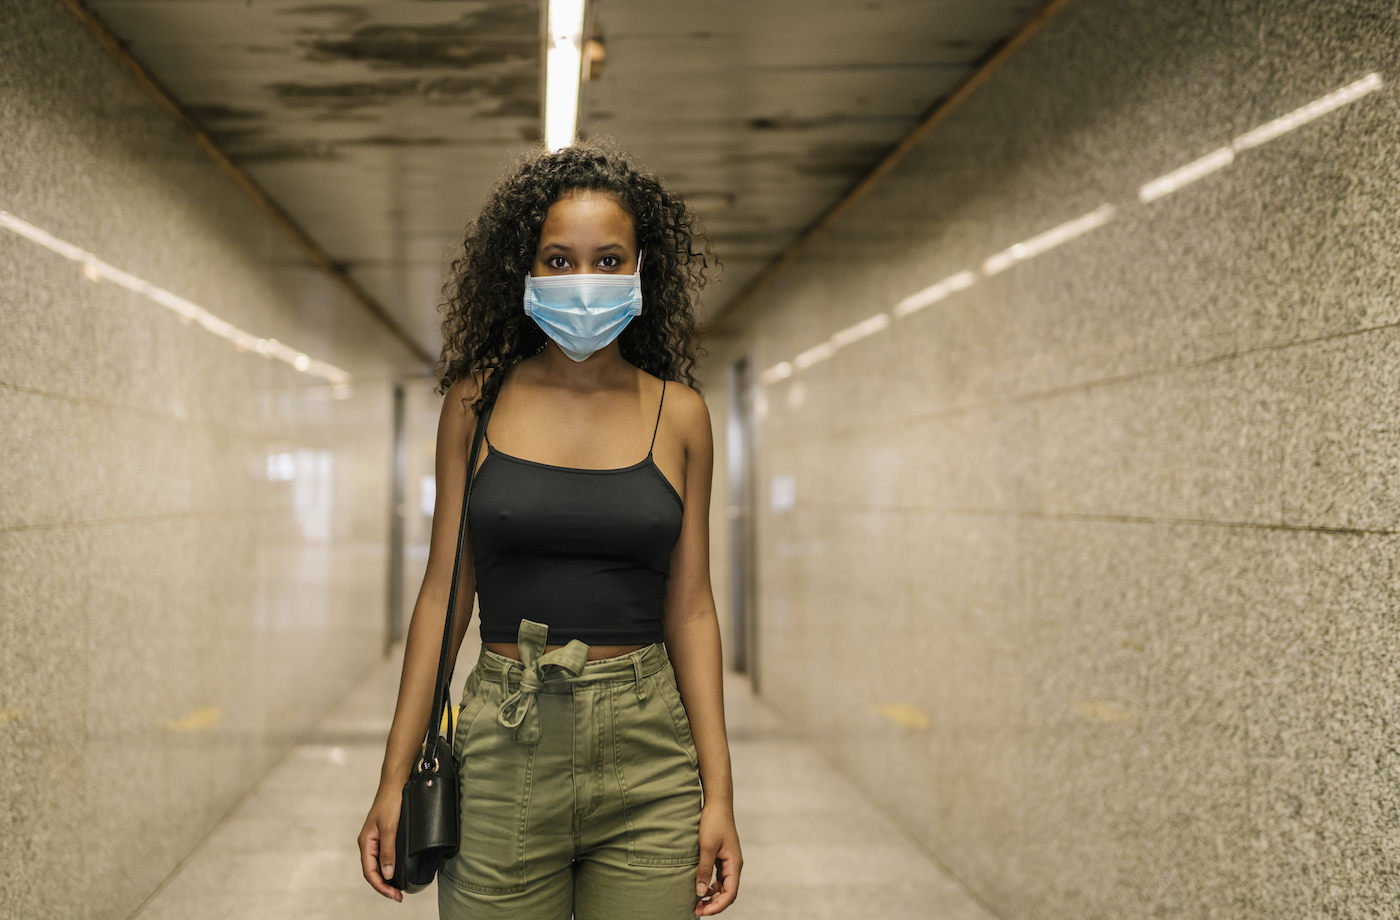 Woman wearing masks while standing in underground walkway at subway station